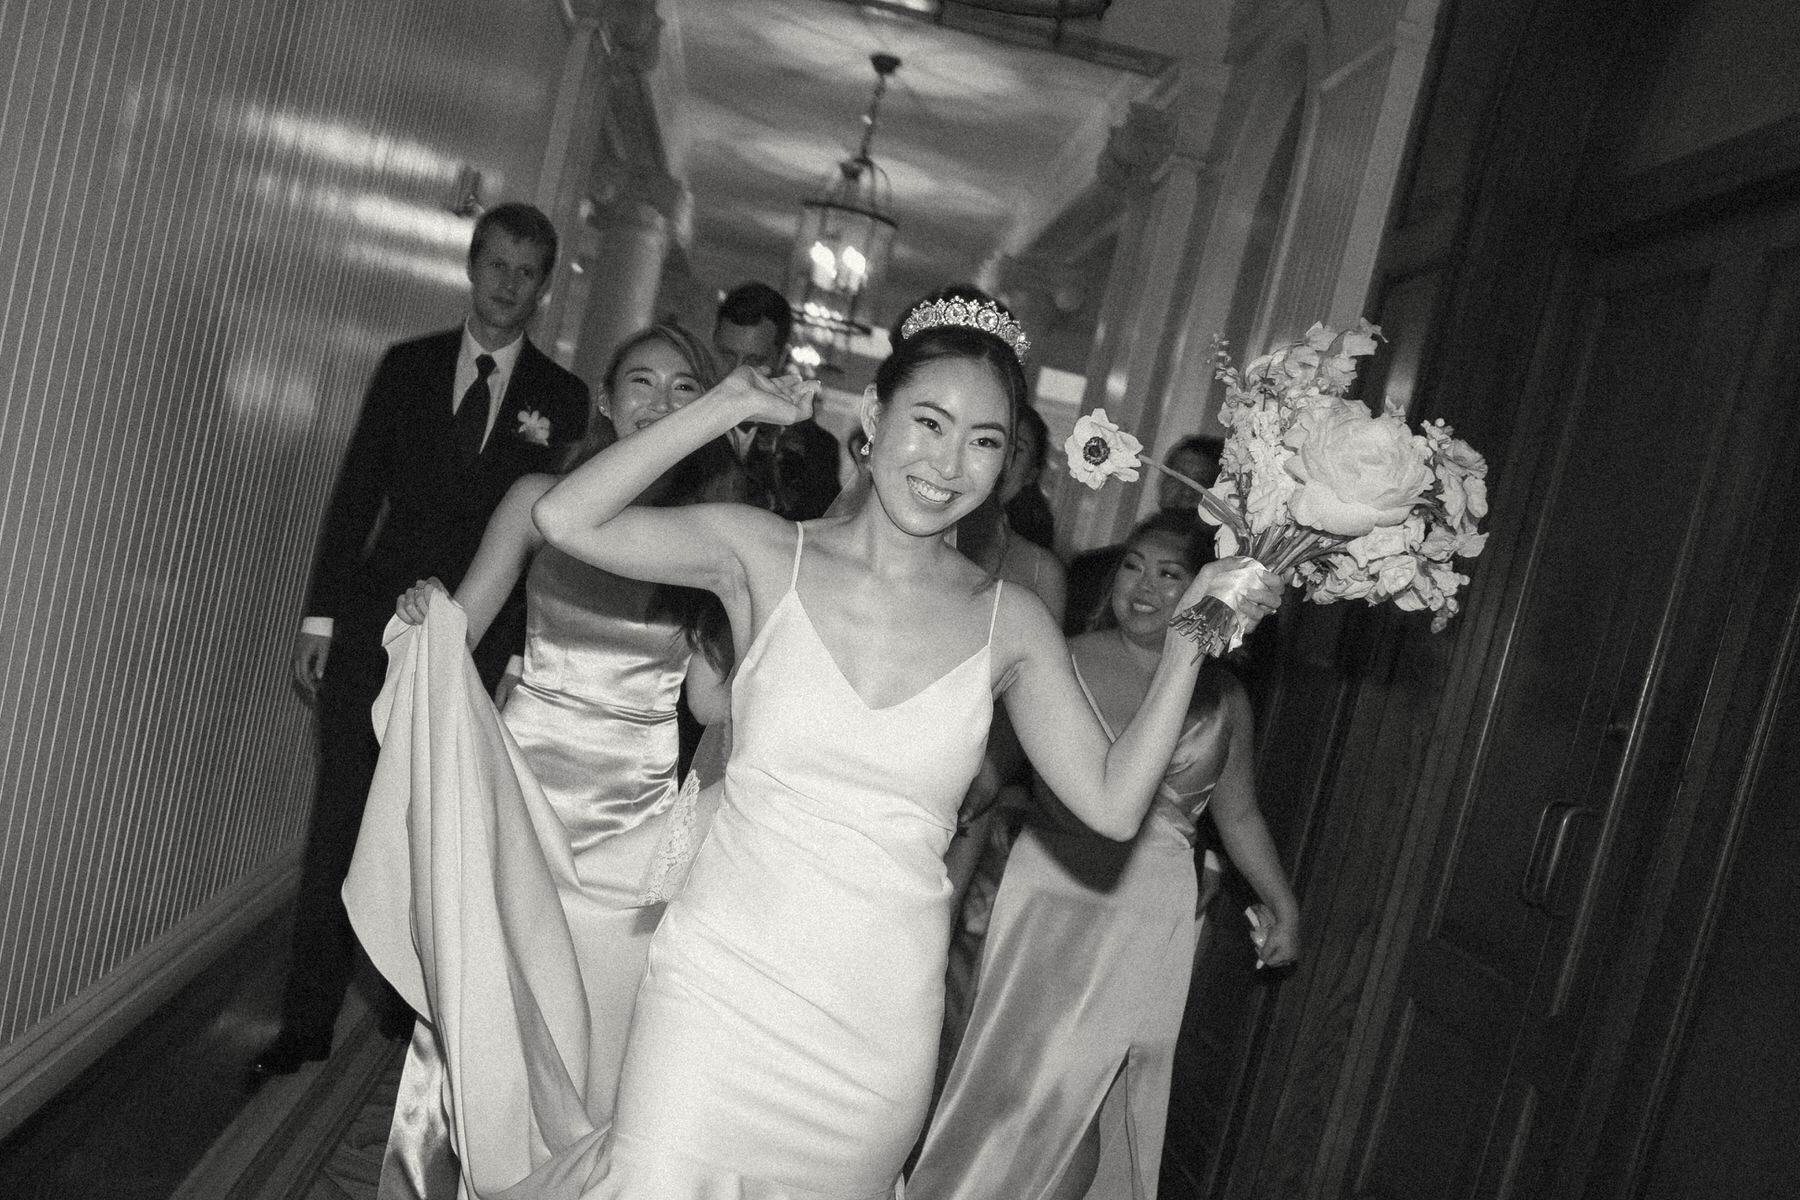 Black and white image of bride followed by her wedding party.